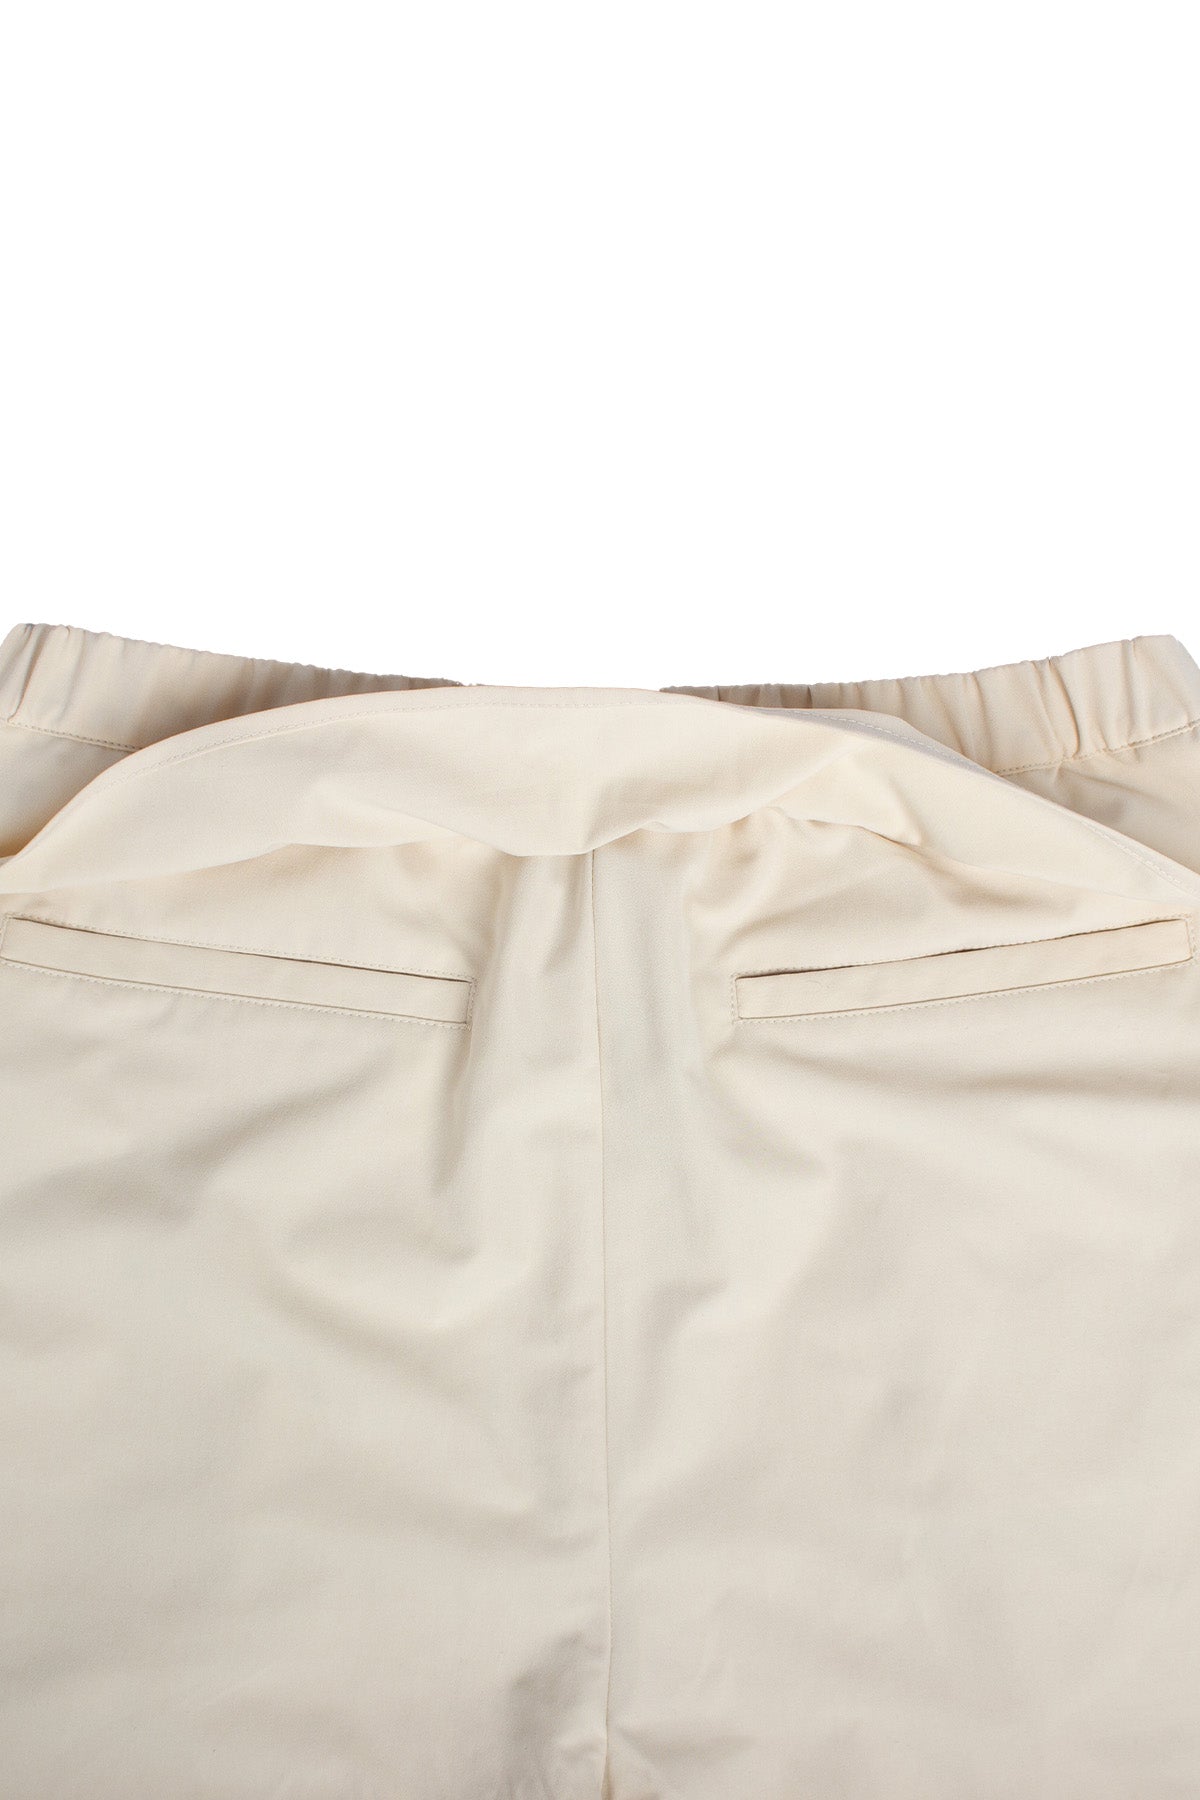 Oasis Cropped Pants Sand